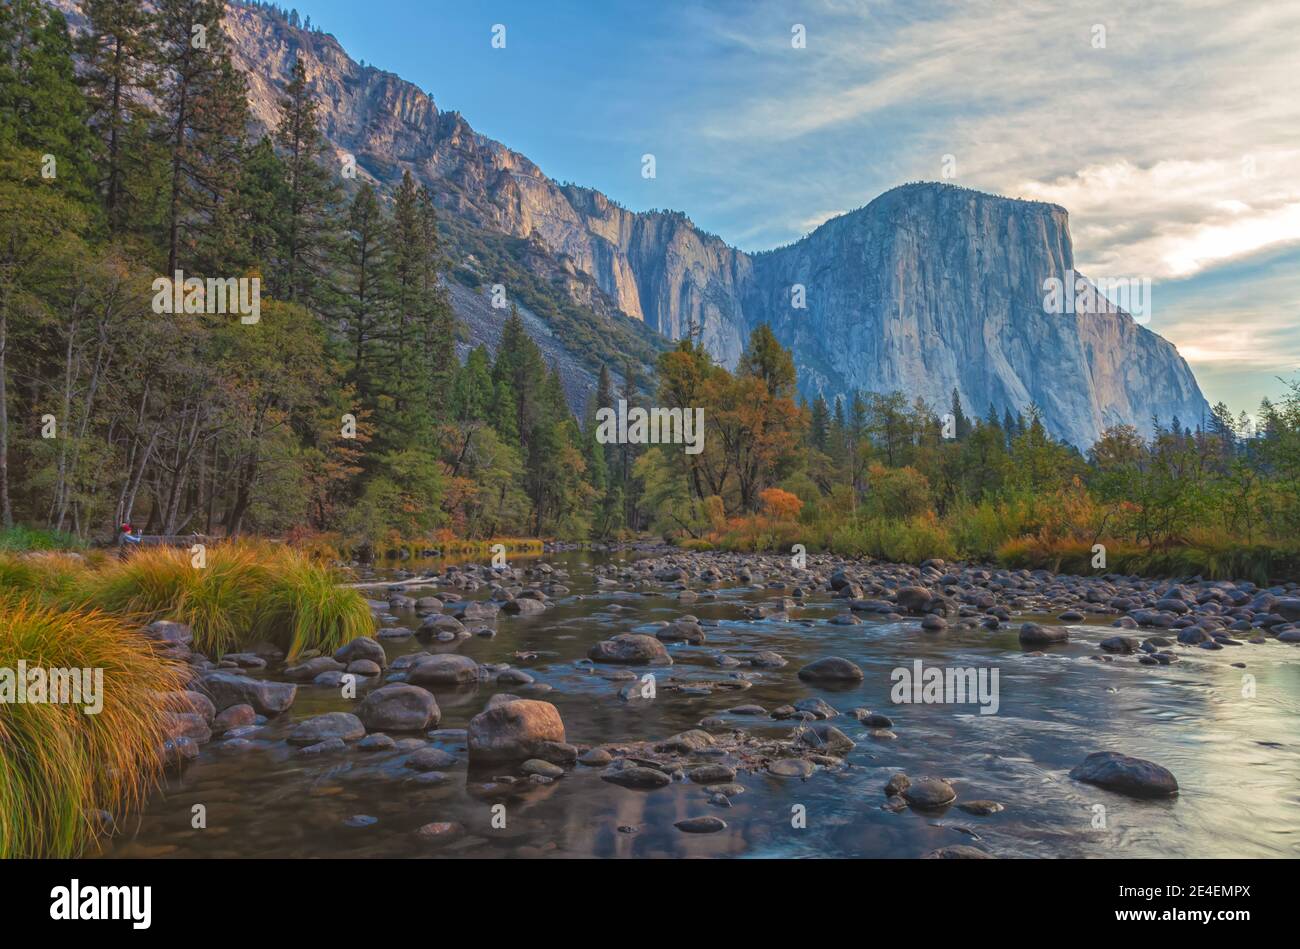 Iconic view of the El Capitan by the Merced River in late autumn, Yosemite National Park, California, USA, at sunrise. Stock Photo